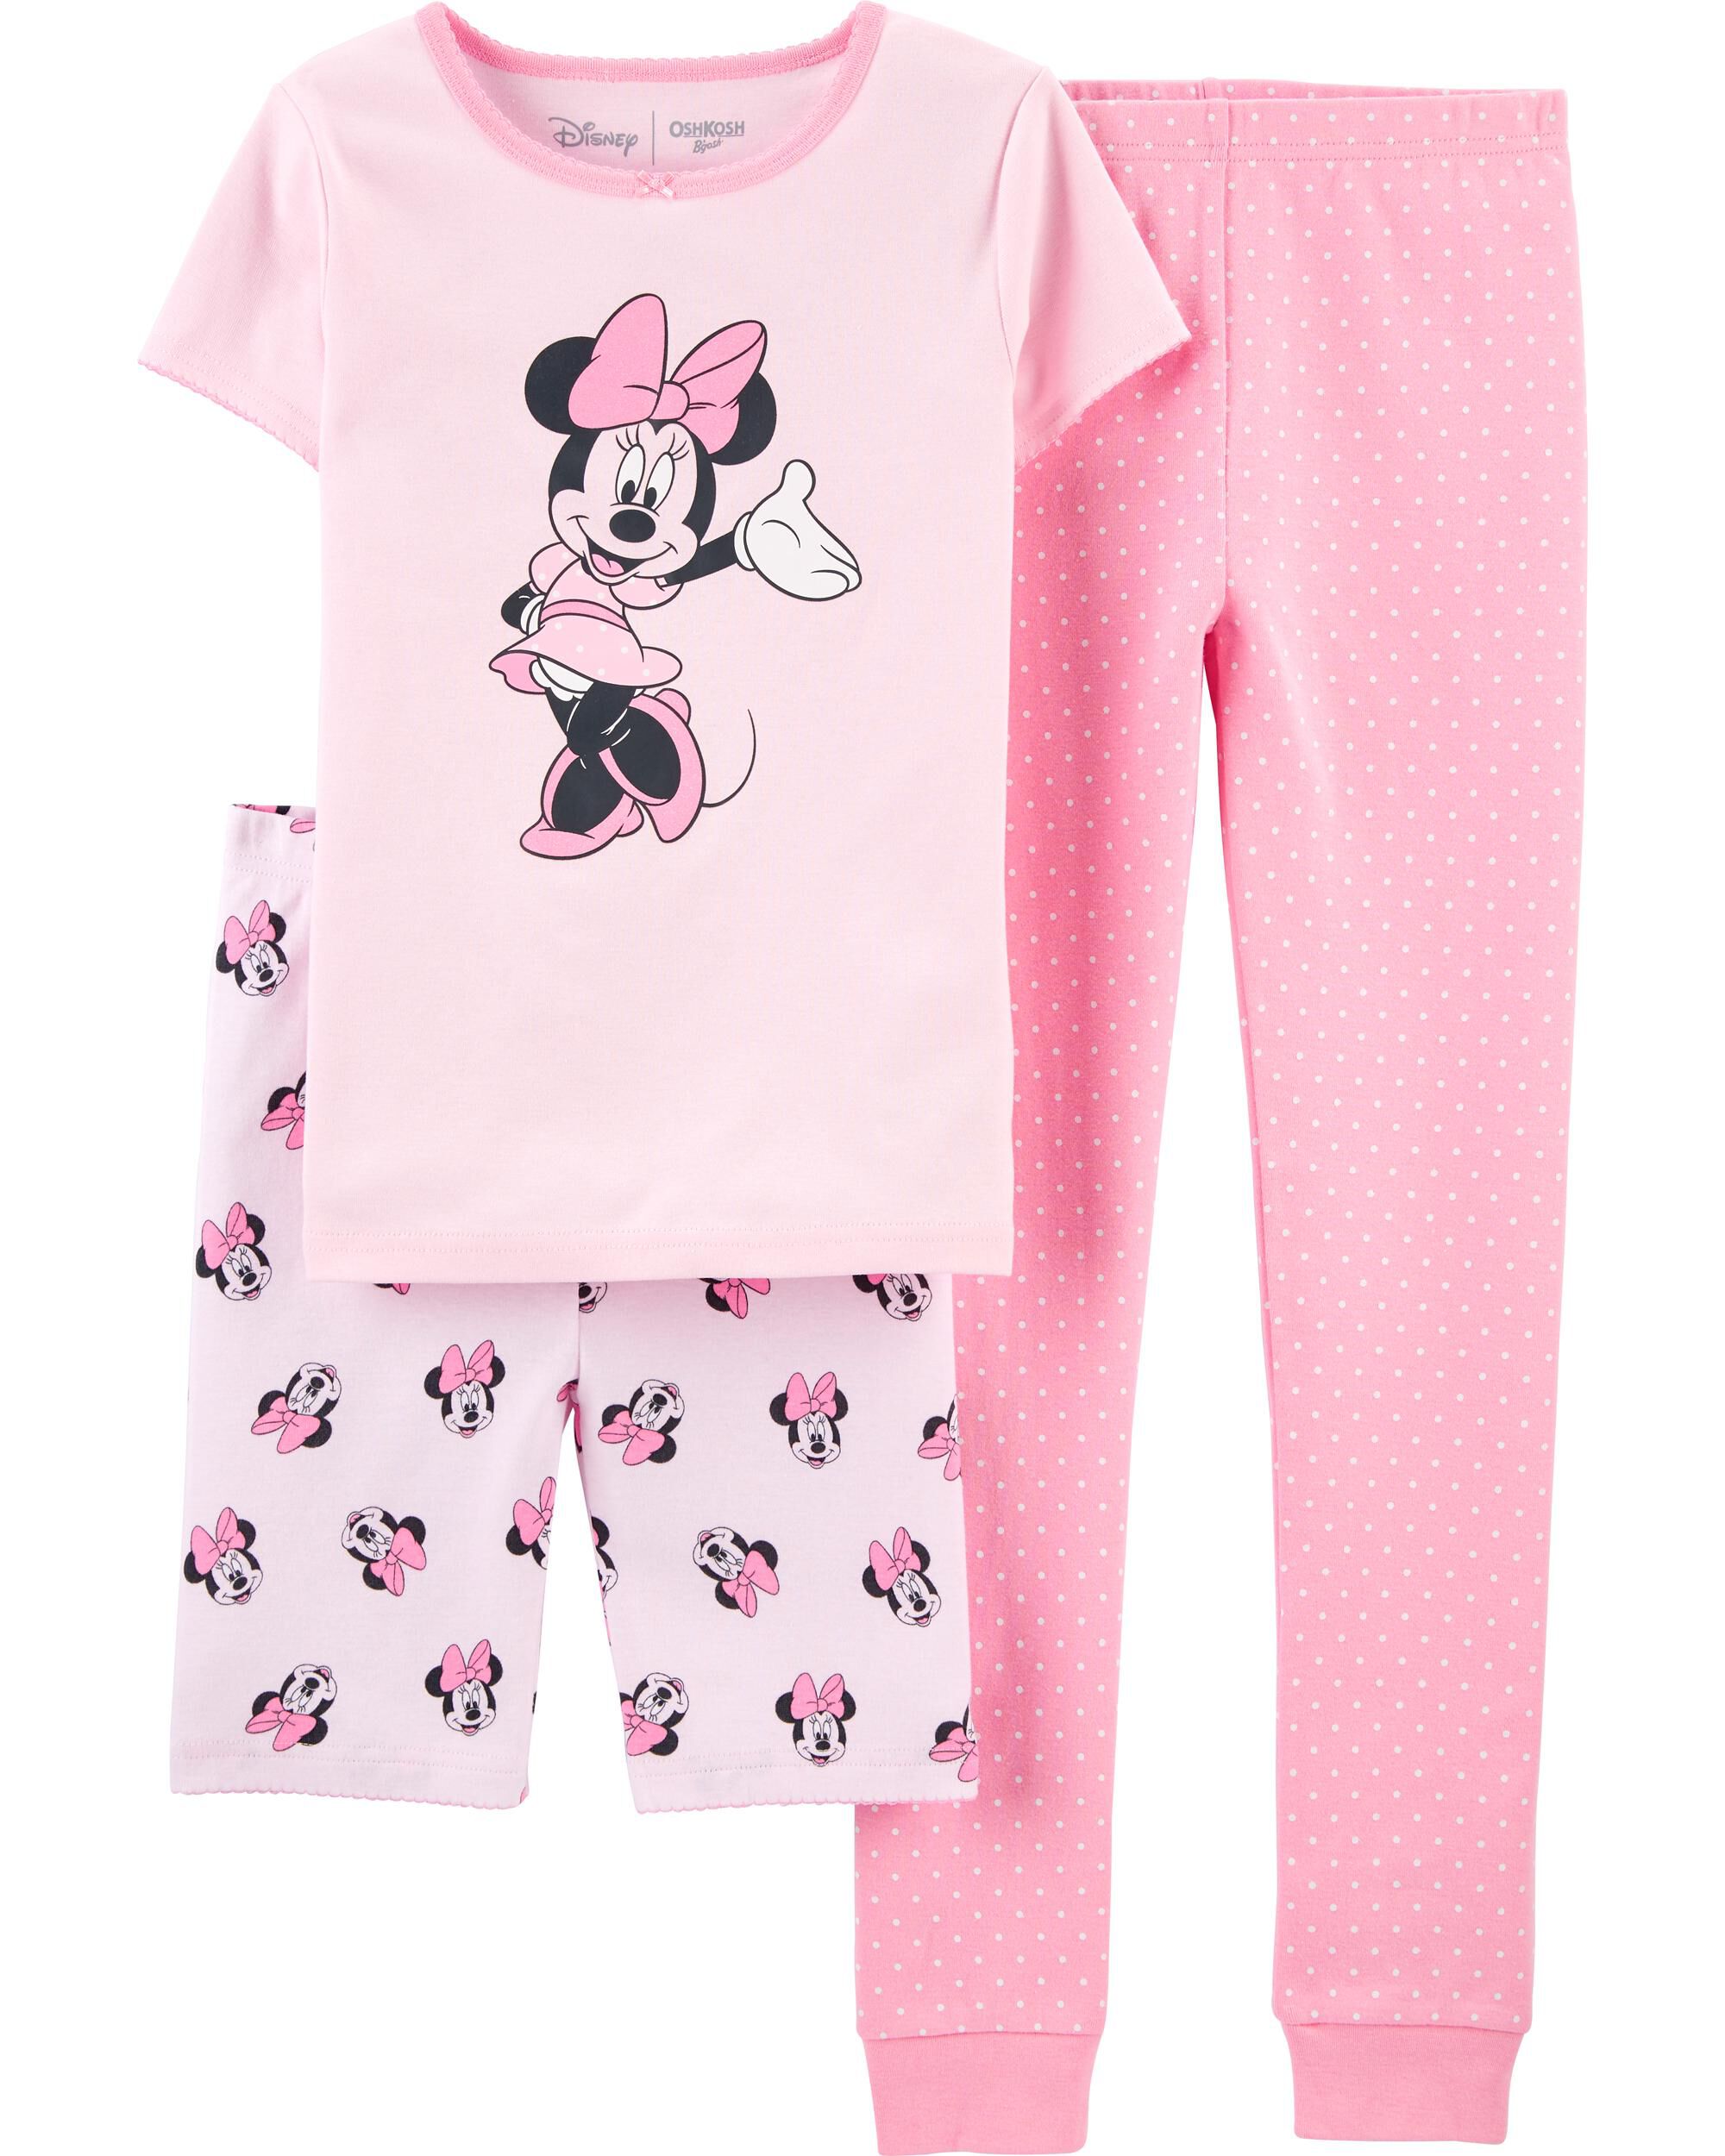 Details about   Carter's Baby Girls 3 Pc Pajama Set NWT Totally Cute or Daydream  12  Months